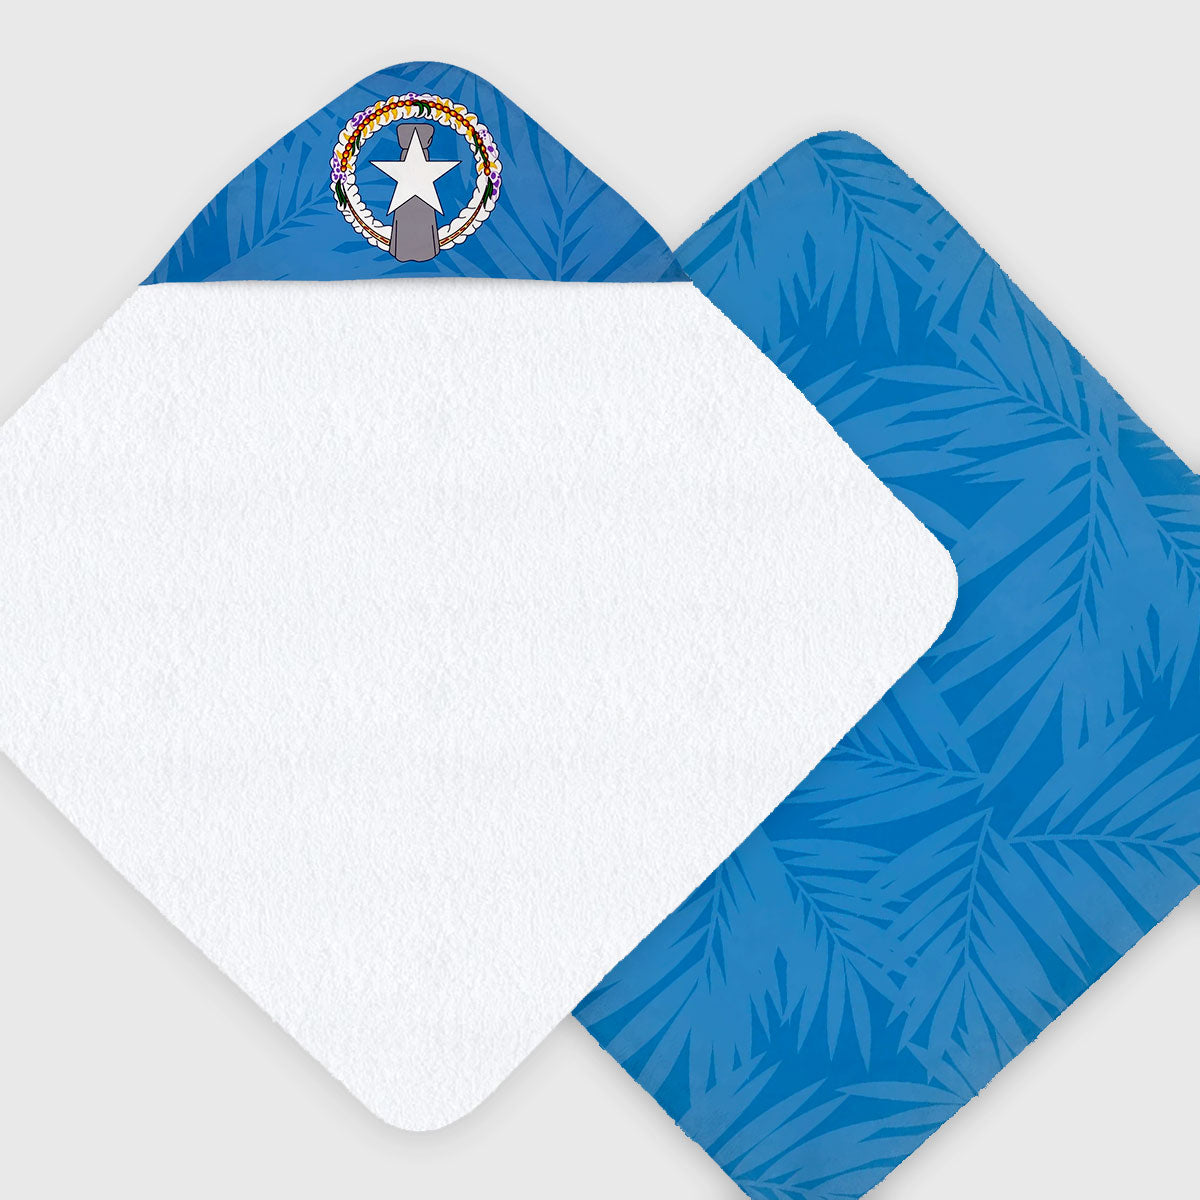 CNMI Flag Coconut Leaves Hooded Baby Towel